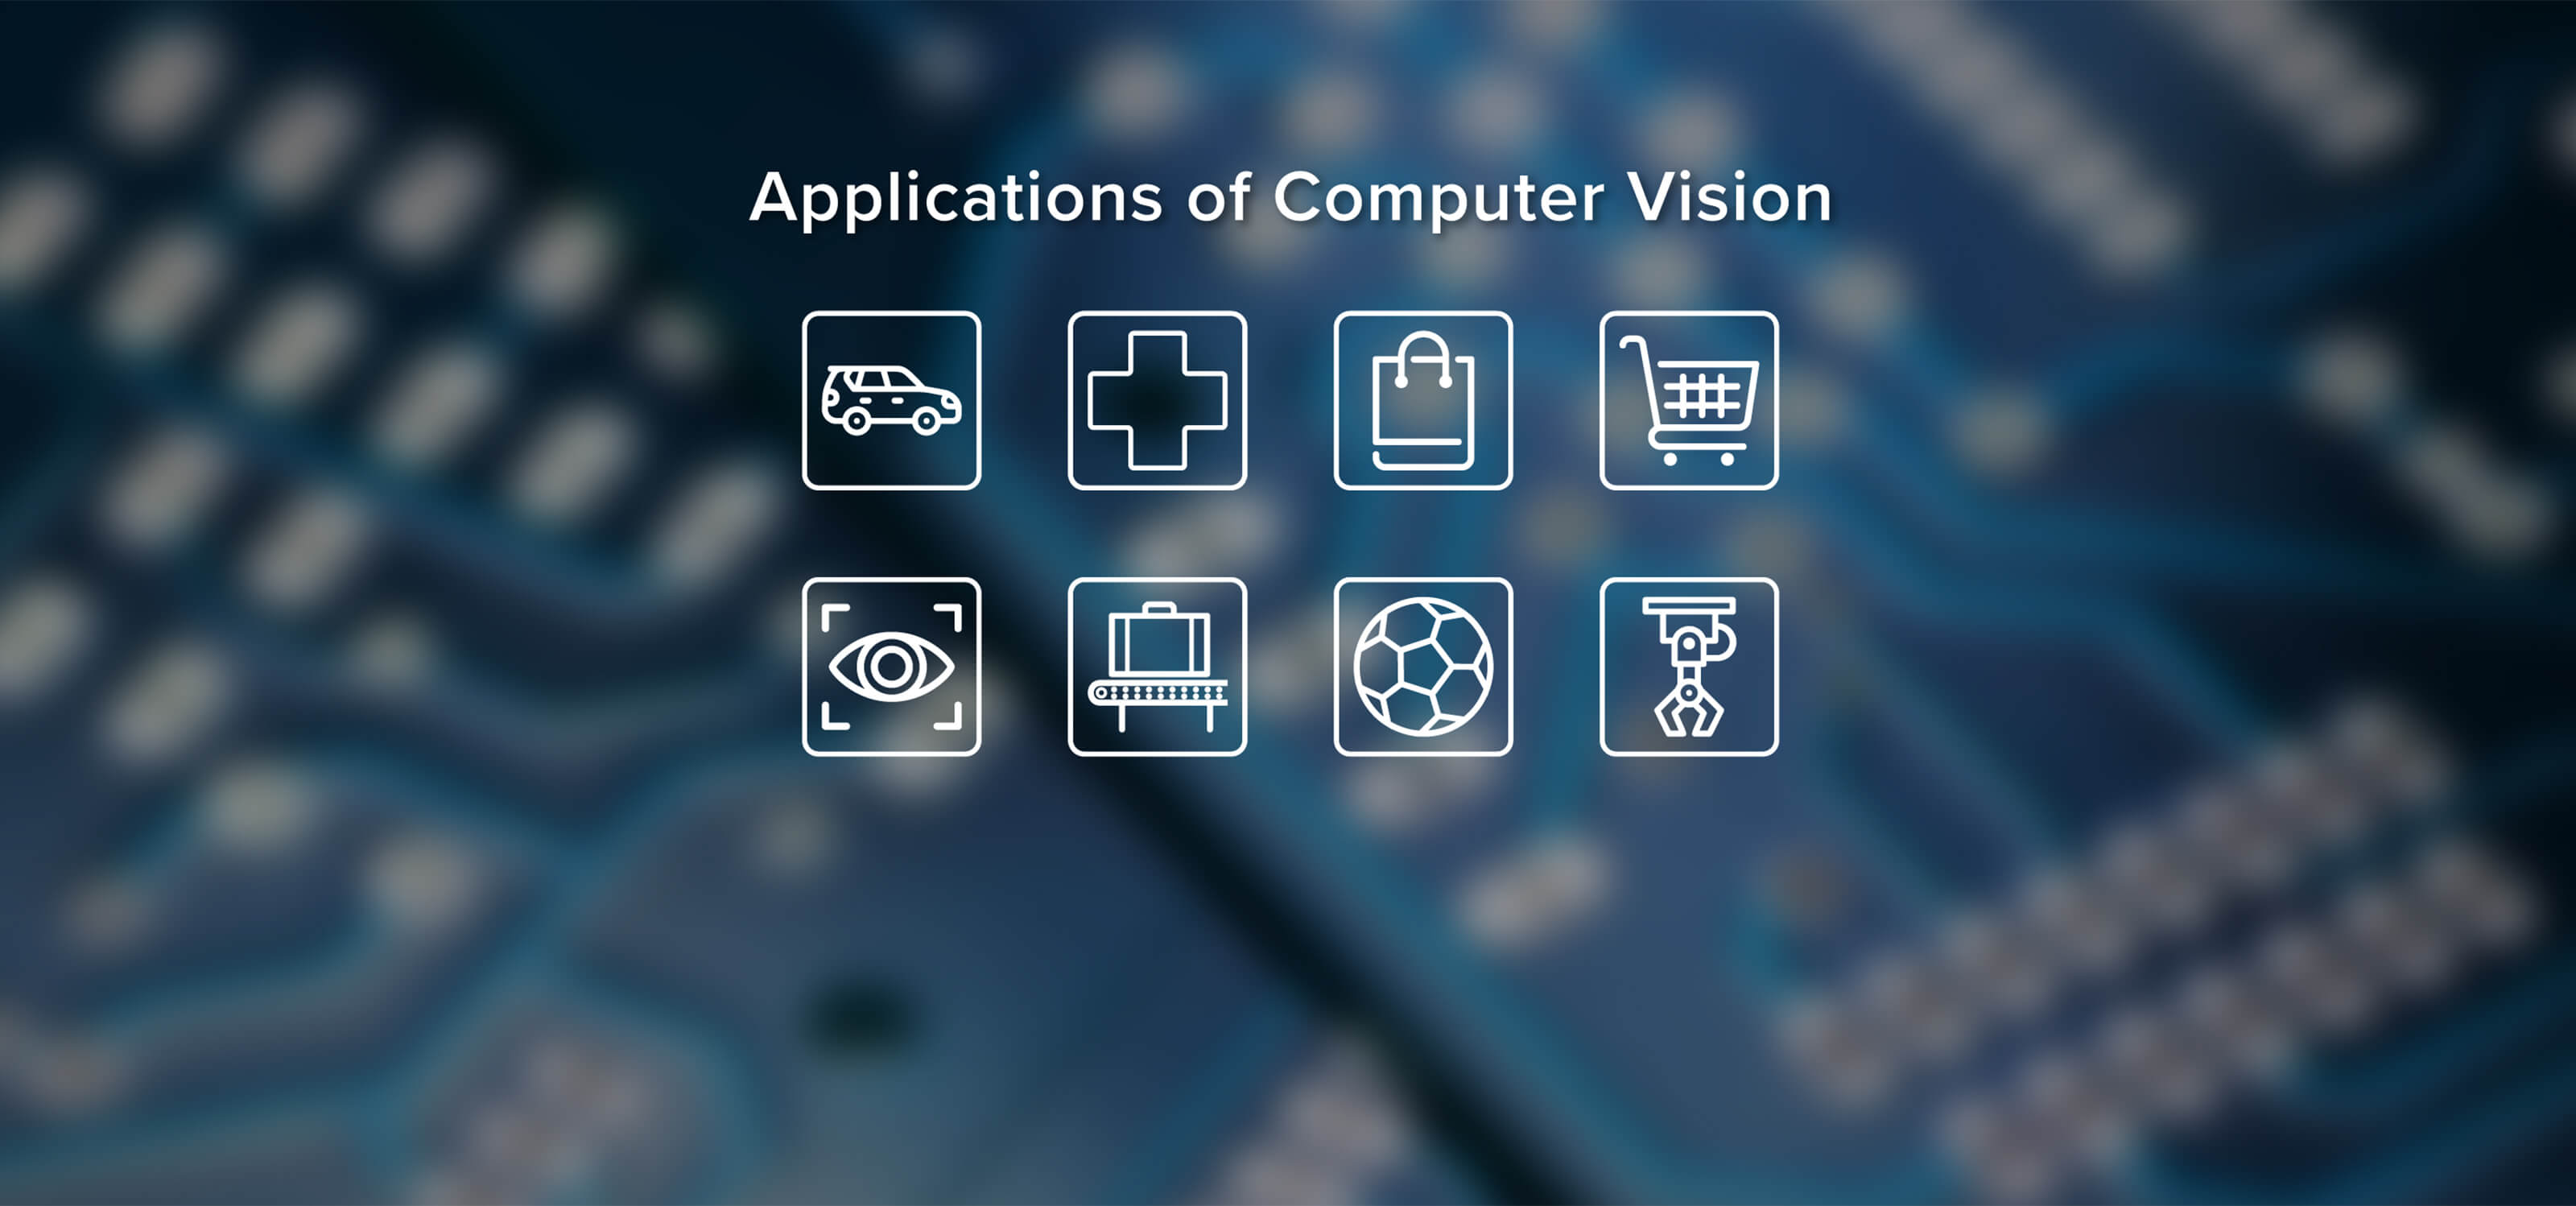 Eight graphical icons with the text “Applications of Computer Vision”